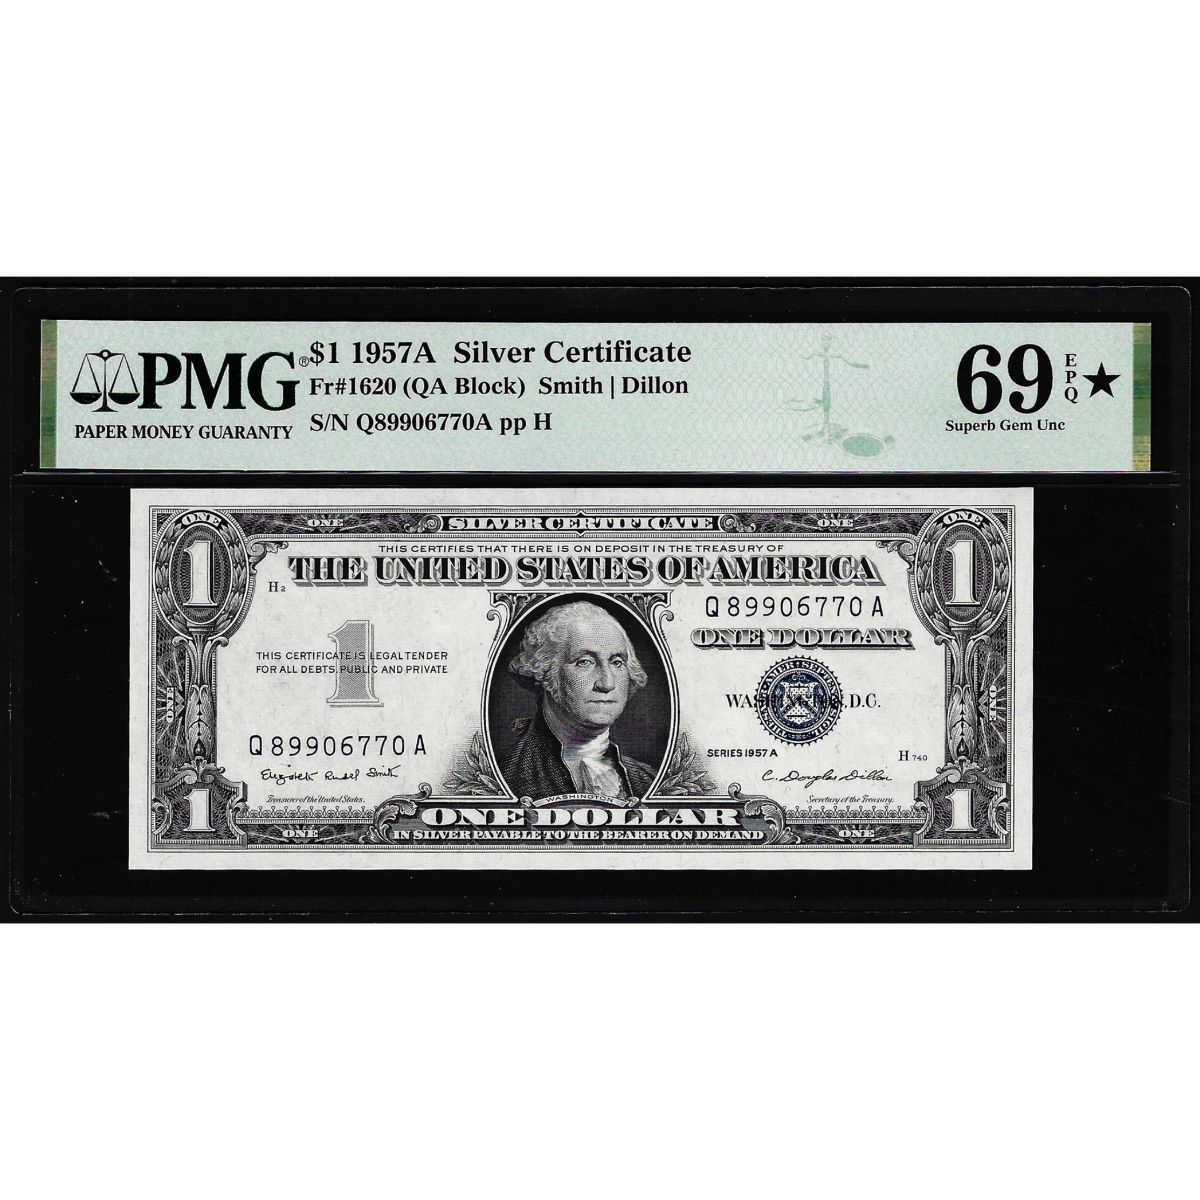 BK Auctions – Rare Banknotes, Gold & Silver Coins, & More!